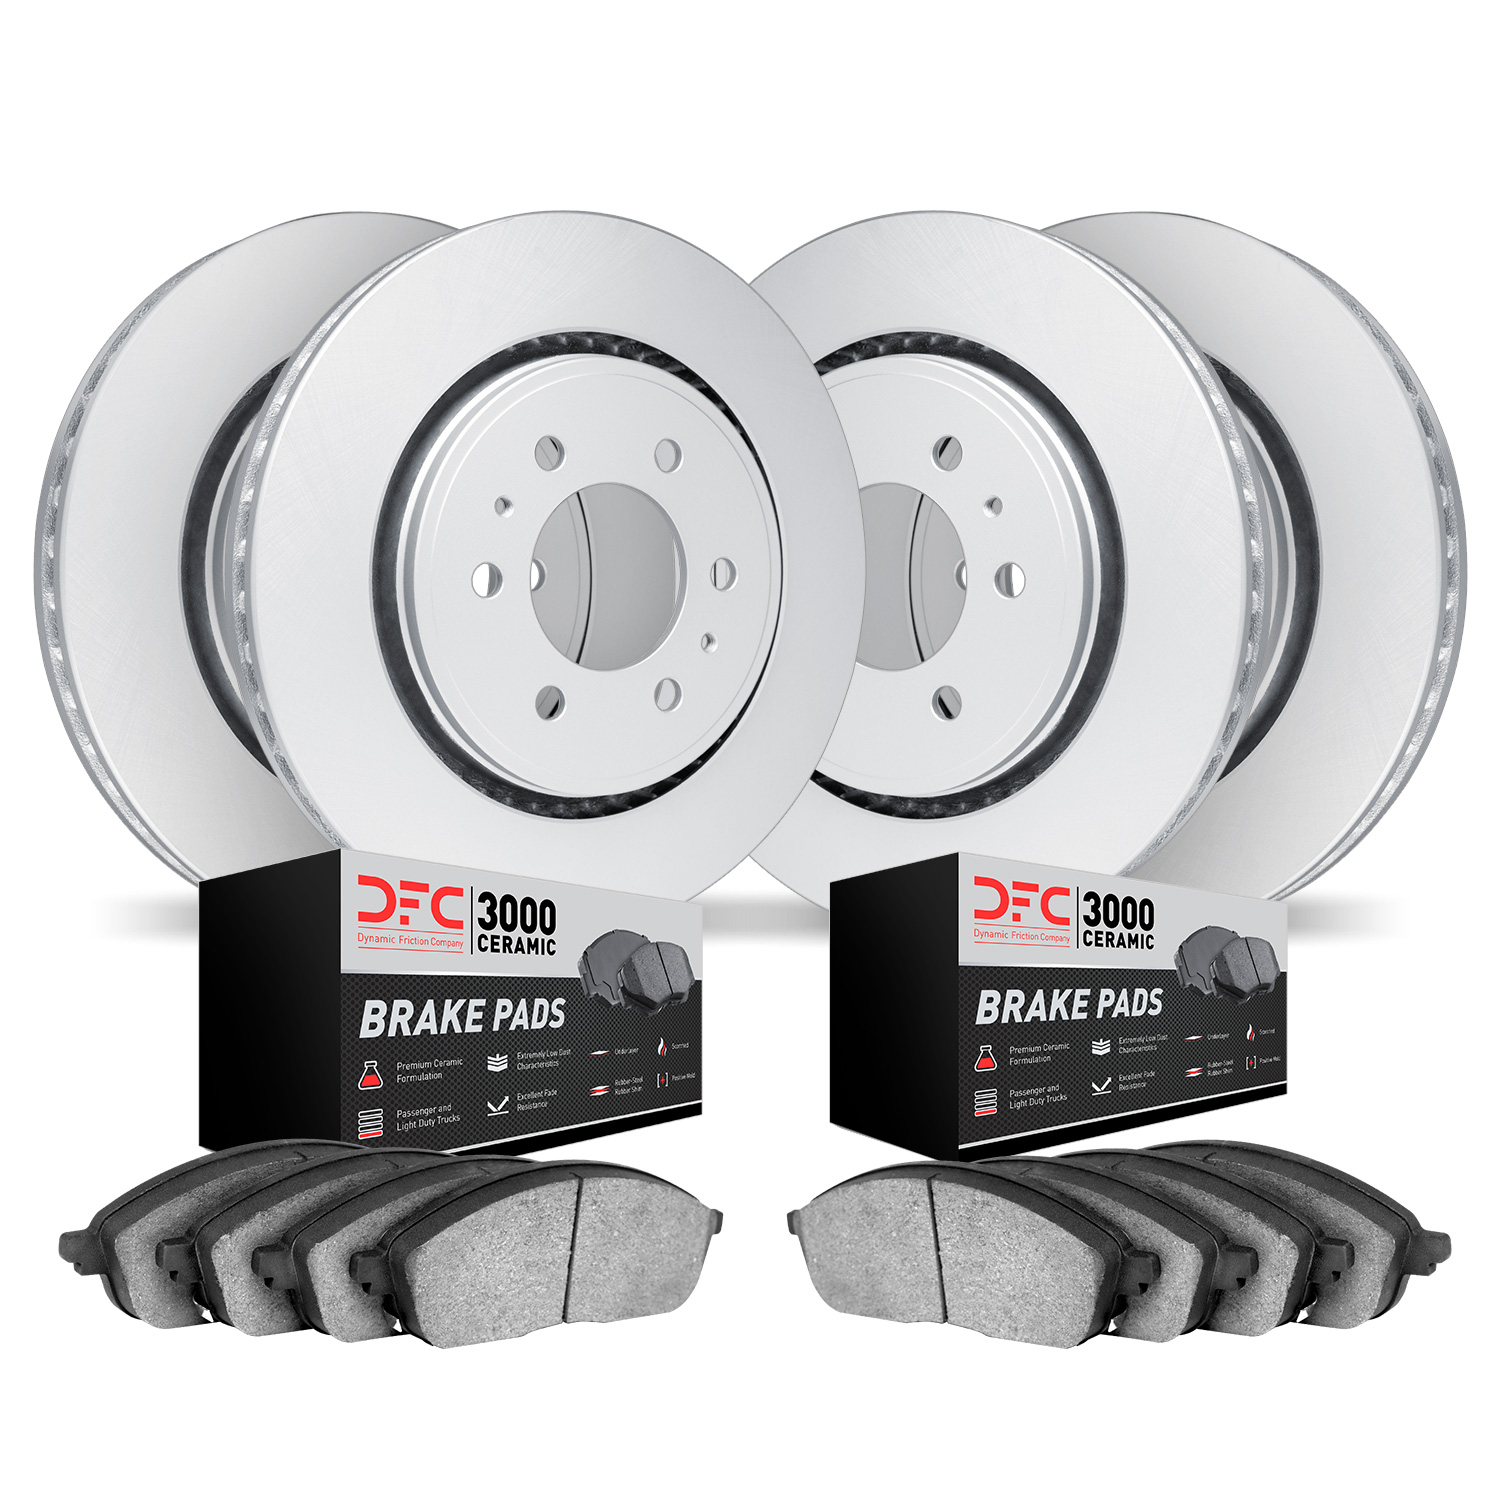 4304-67021 Geospec Brake Rotors with 3000-Series Ceramic Brake Pads Kit, 2008-2011 Infiniti/Nissan, Position: Front and Rear